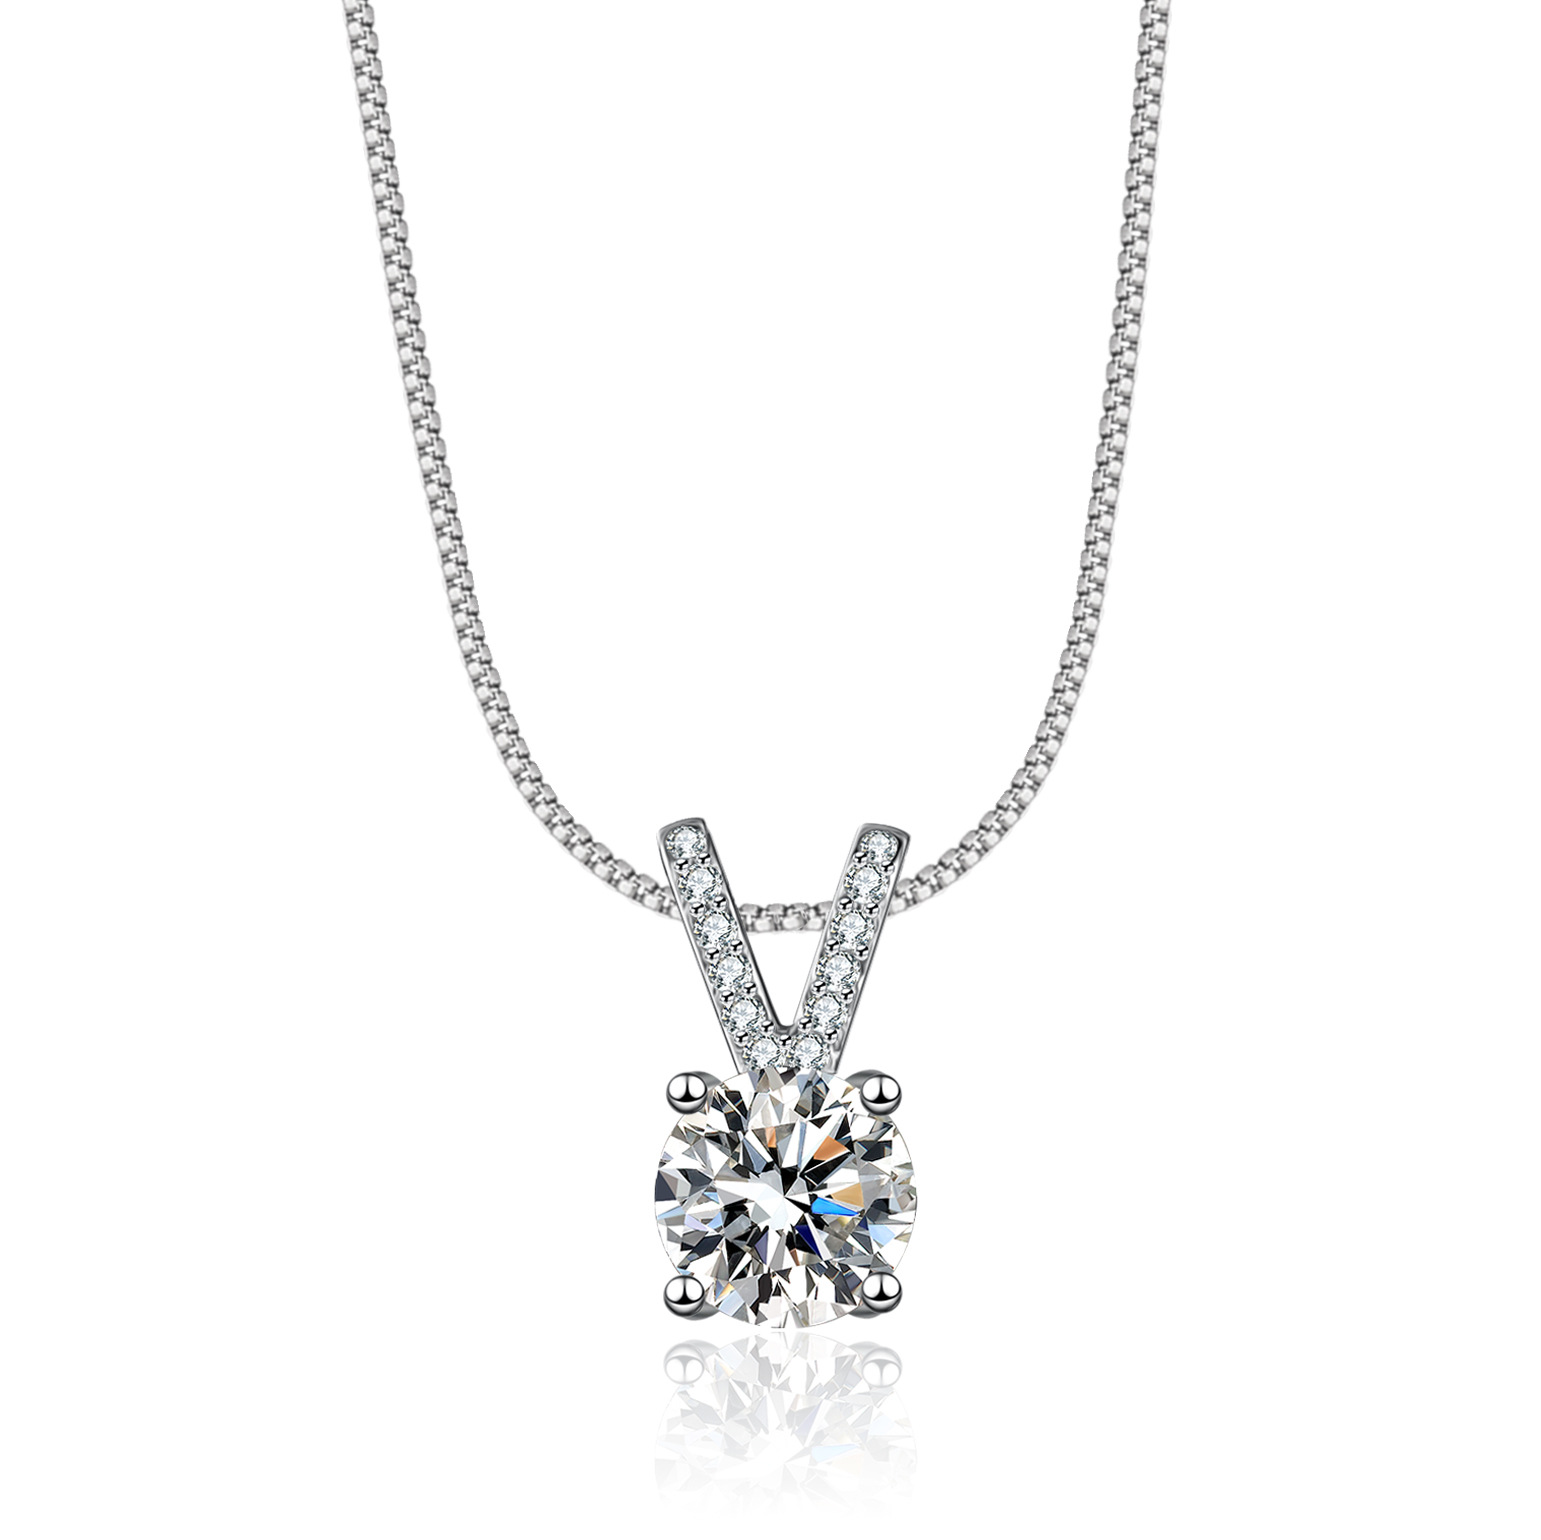 Cz Silver Colored Gem Sterling Silver Pendant Necklace